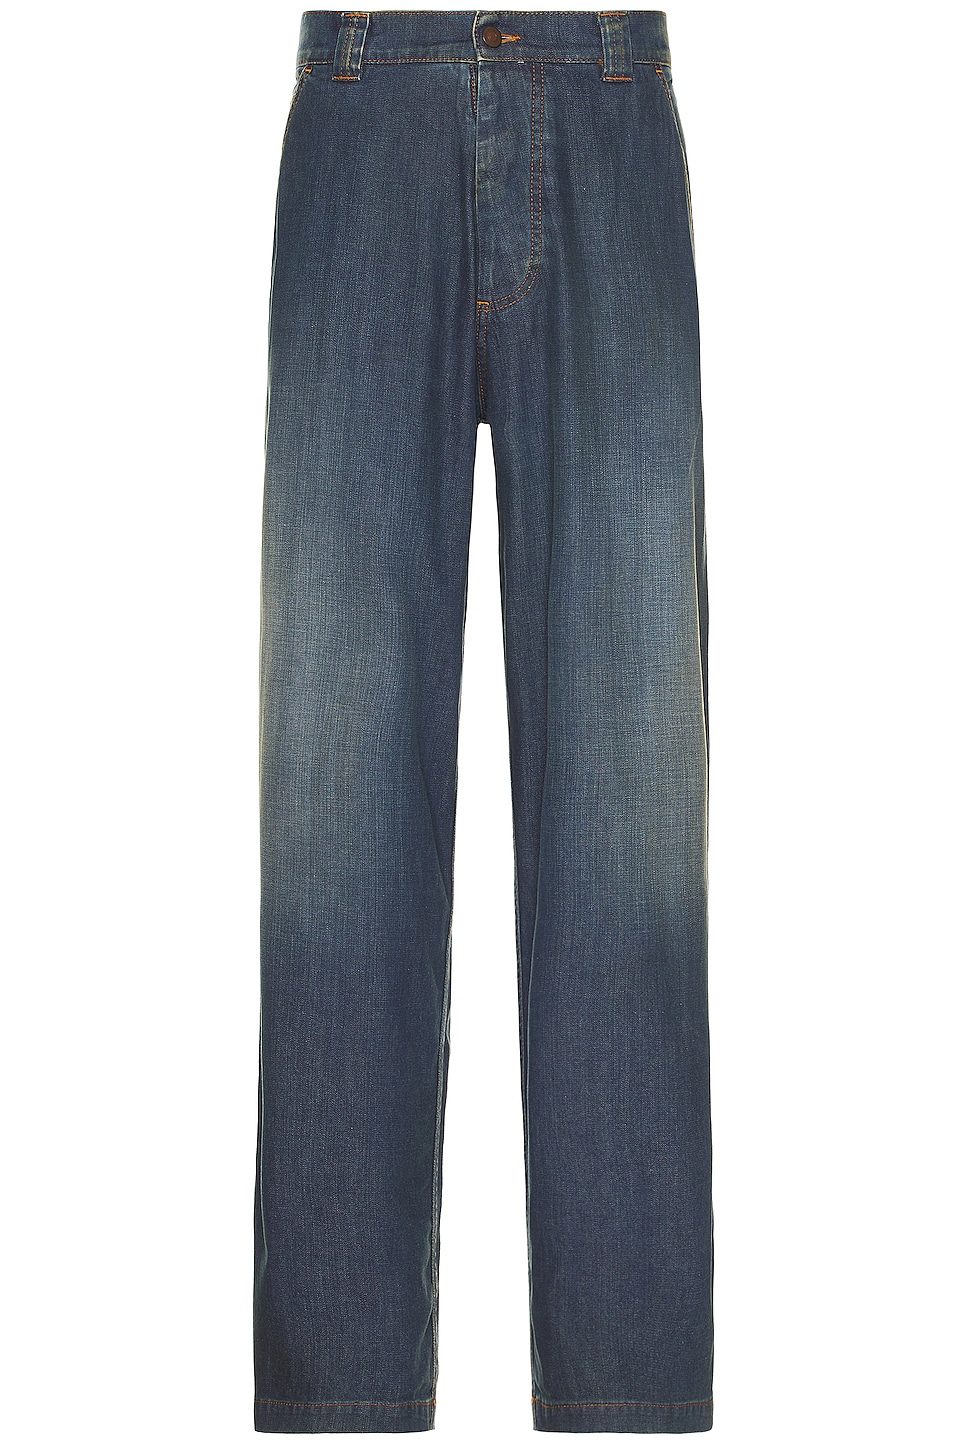 Image 1 of Maison Margiela Pants 5 Pockets in American classic